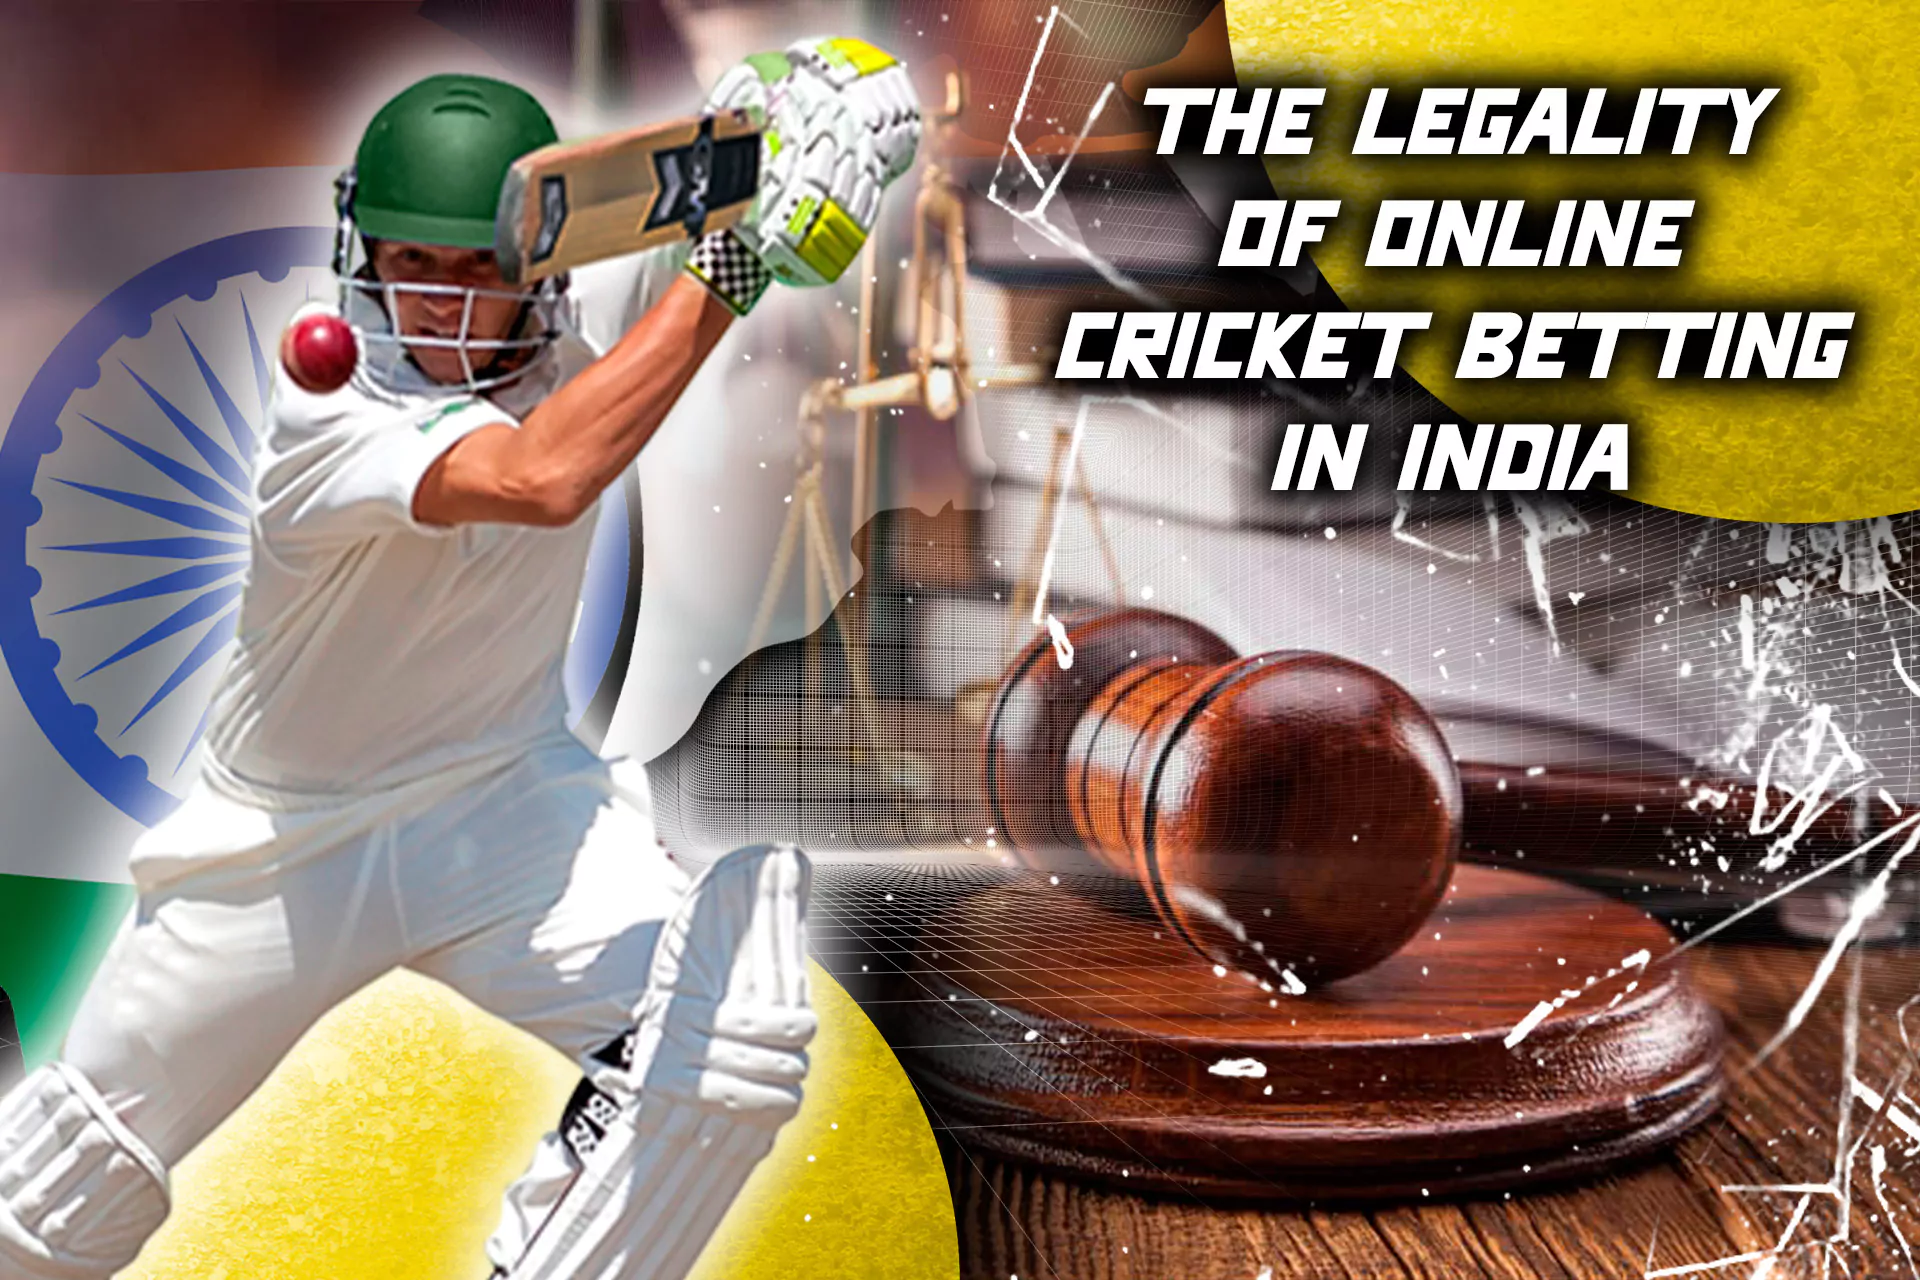 All Indian users understand how important it is when choosing online cricket betting to be sure of the legality and safety.